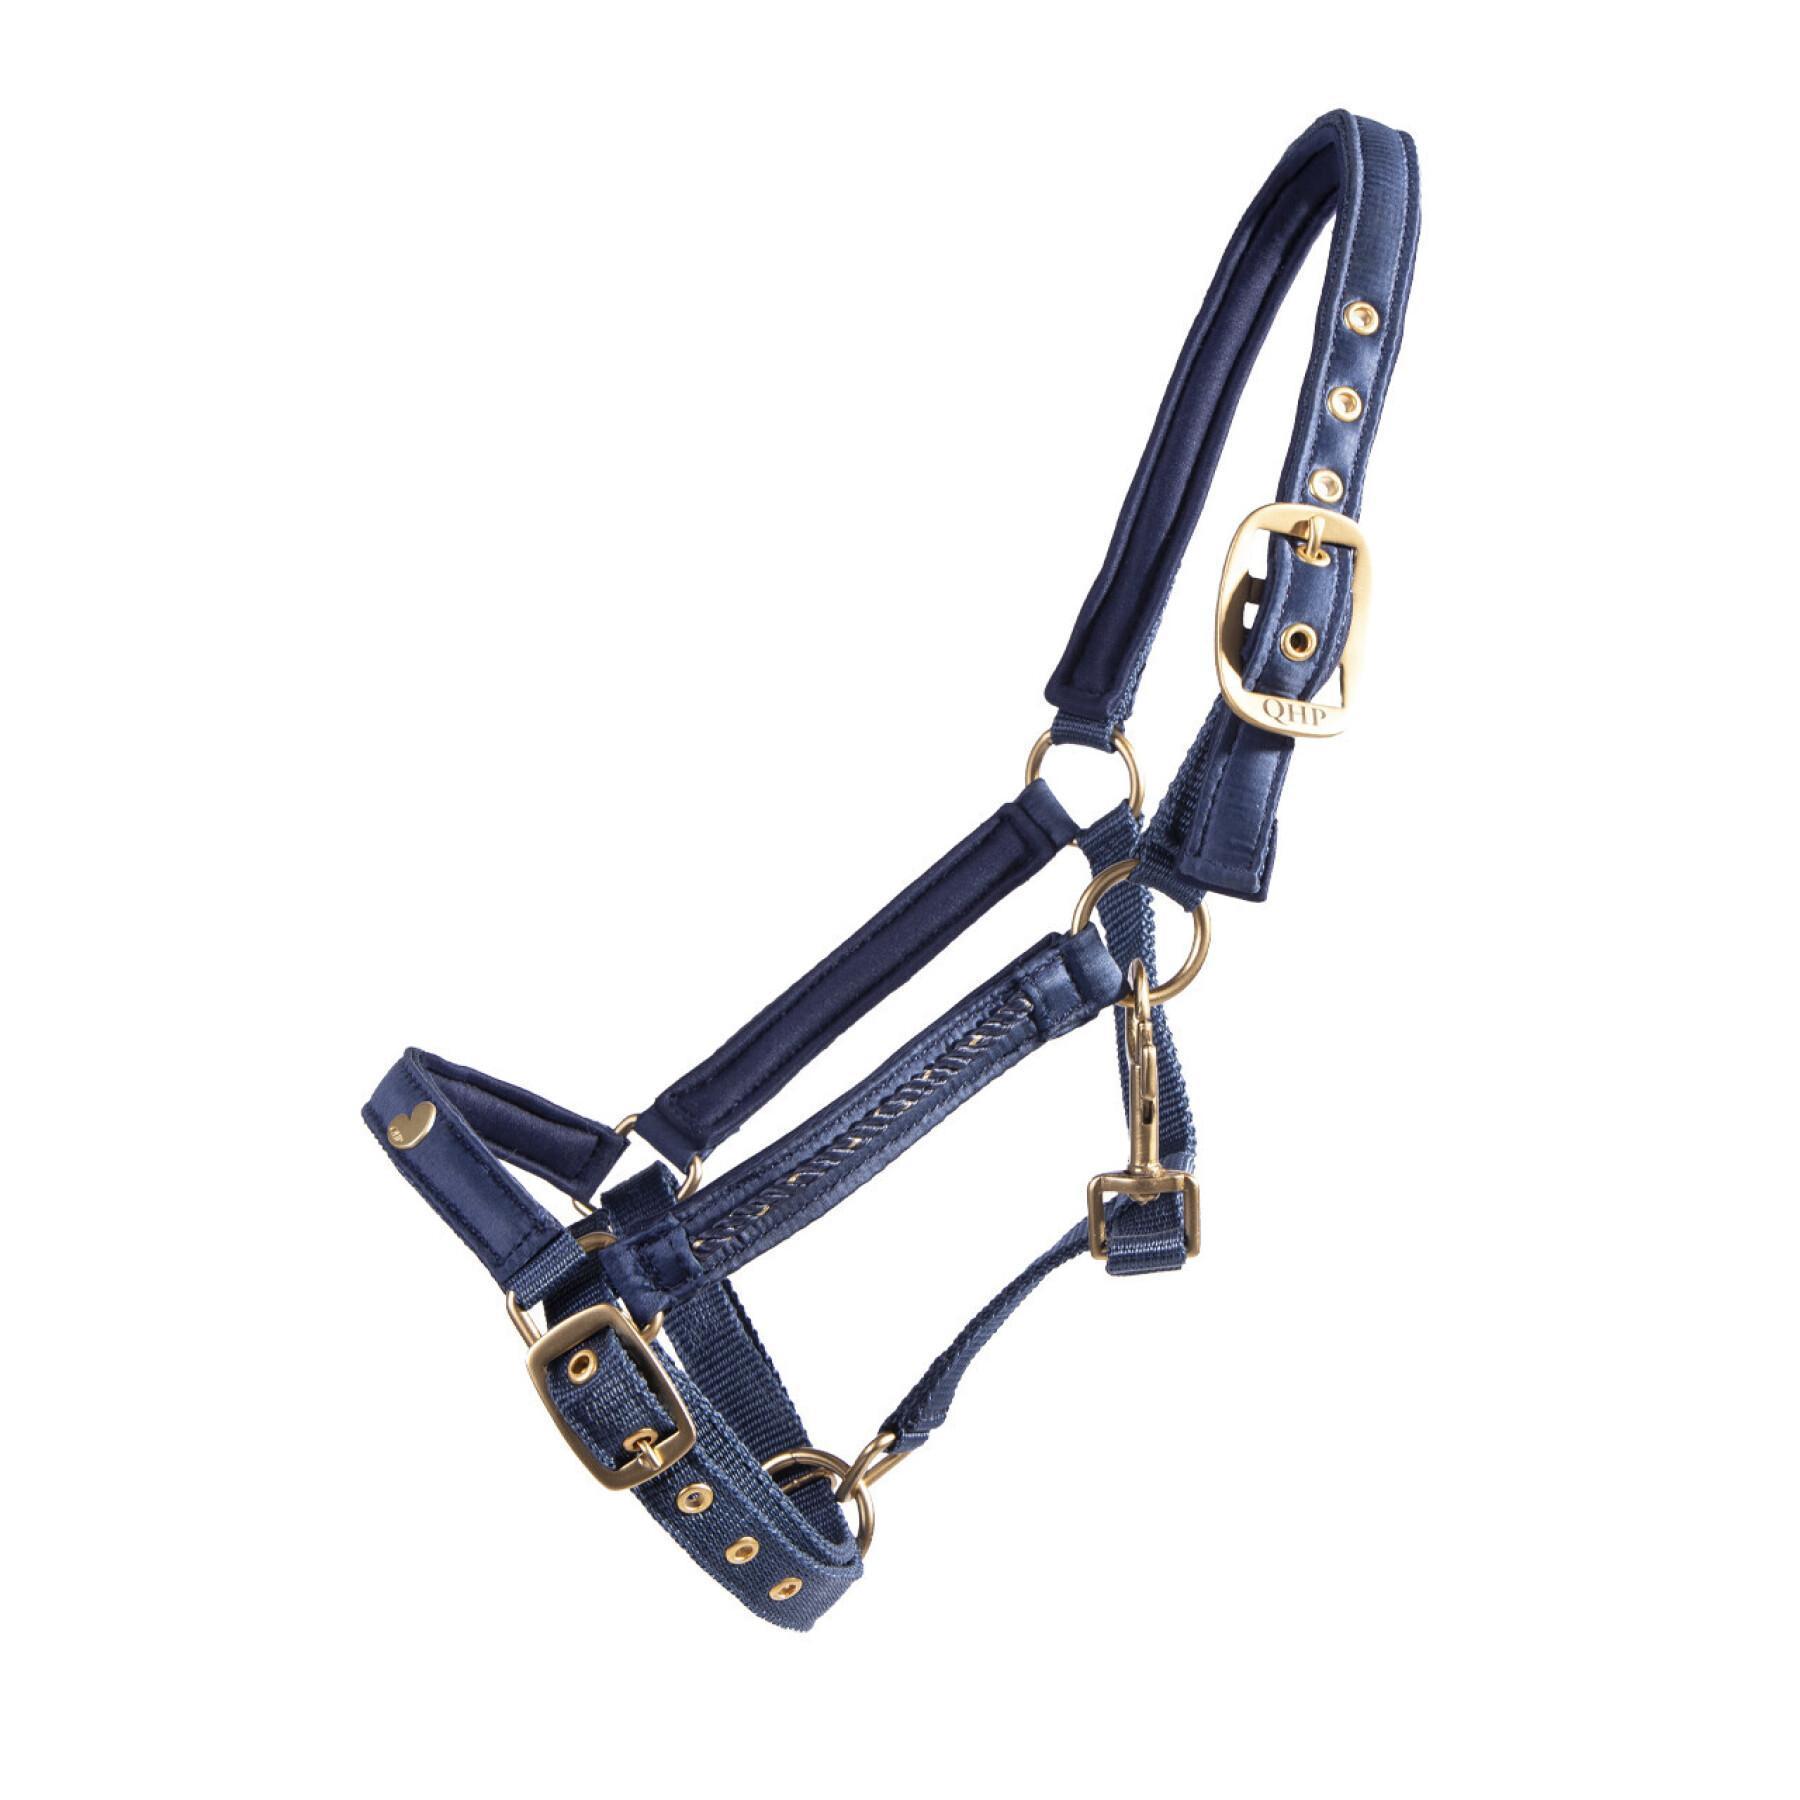 Halter for foal QHP Lily